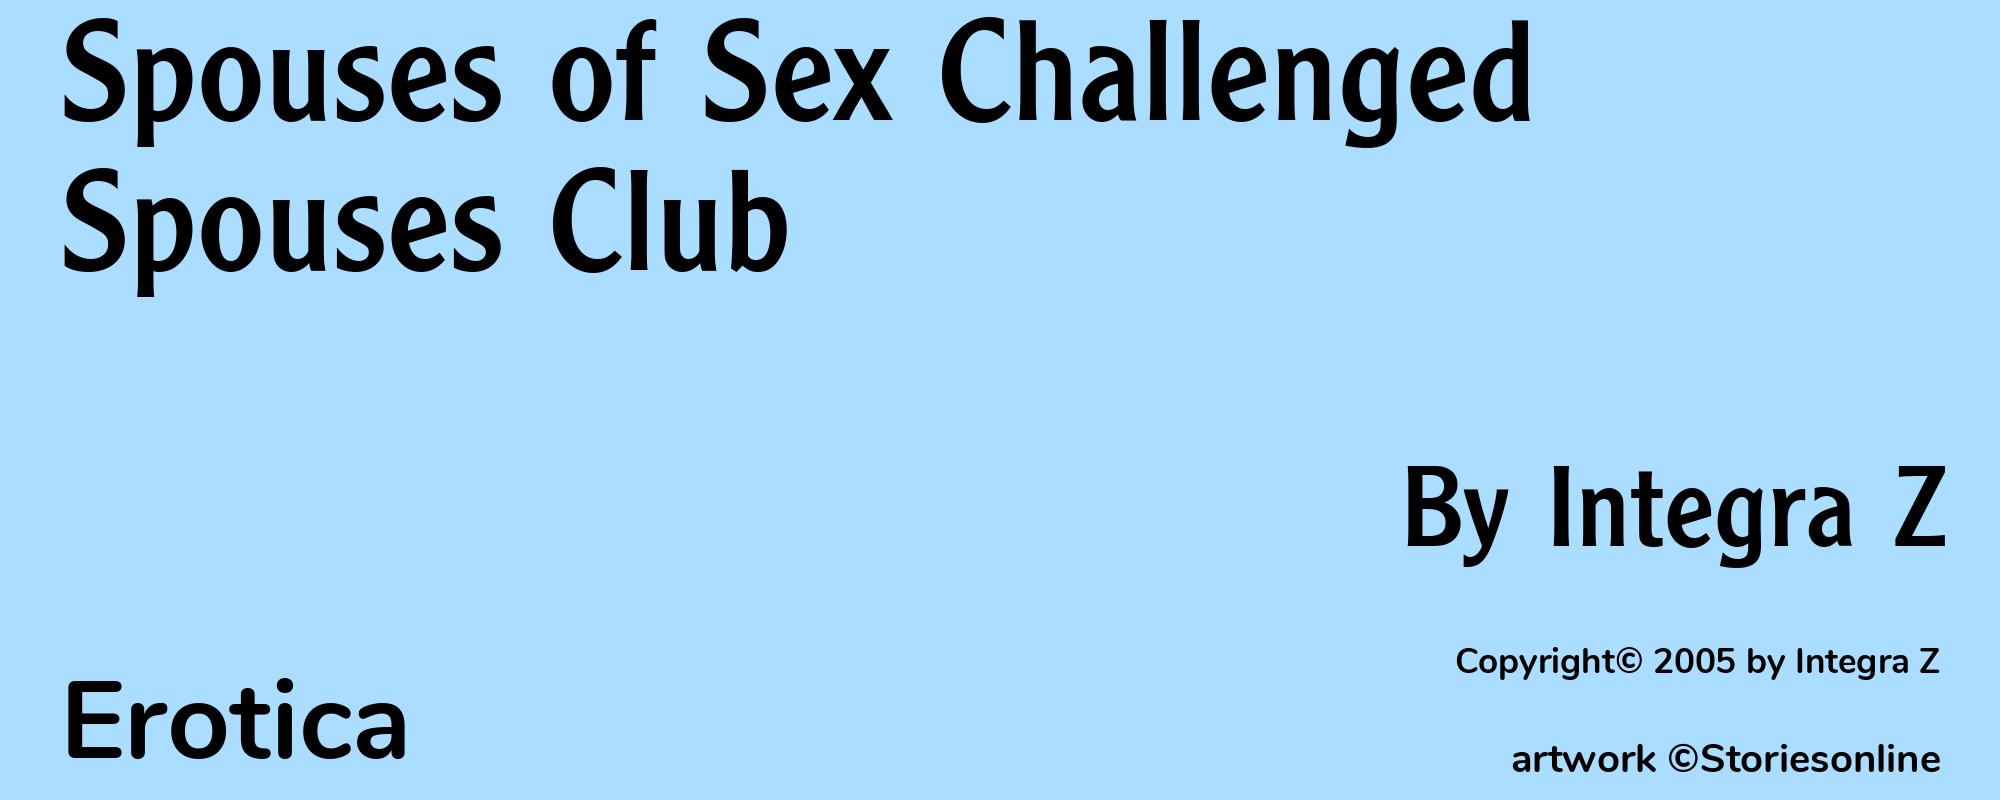 Spouses of Sex Challenged Spouses Club - Cover